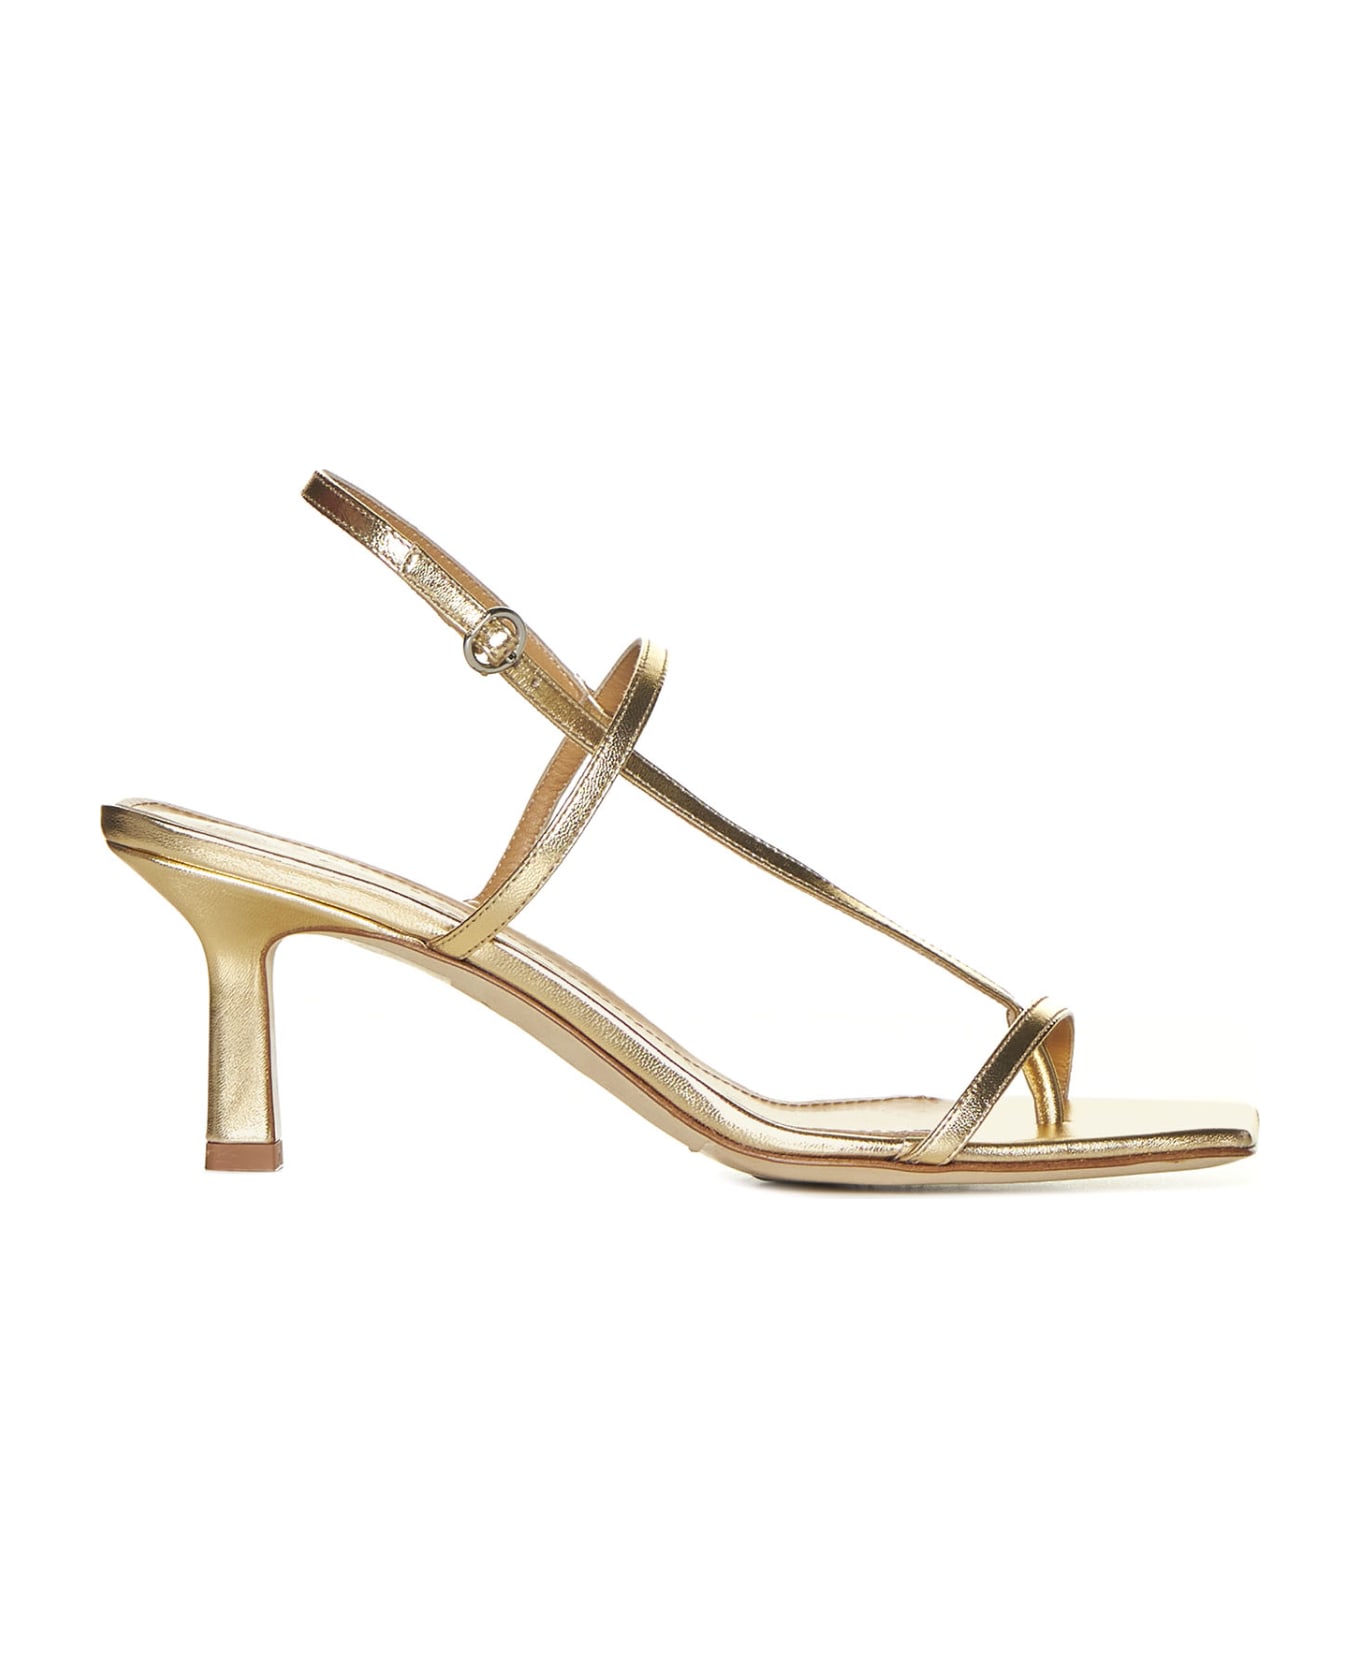 aeyde Sandals - Laminated gold